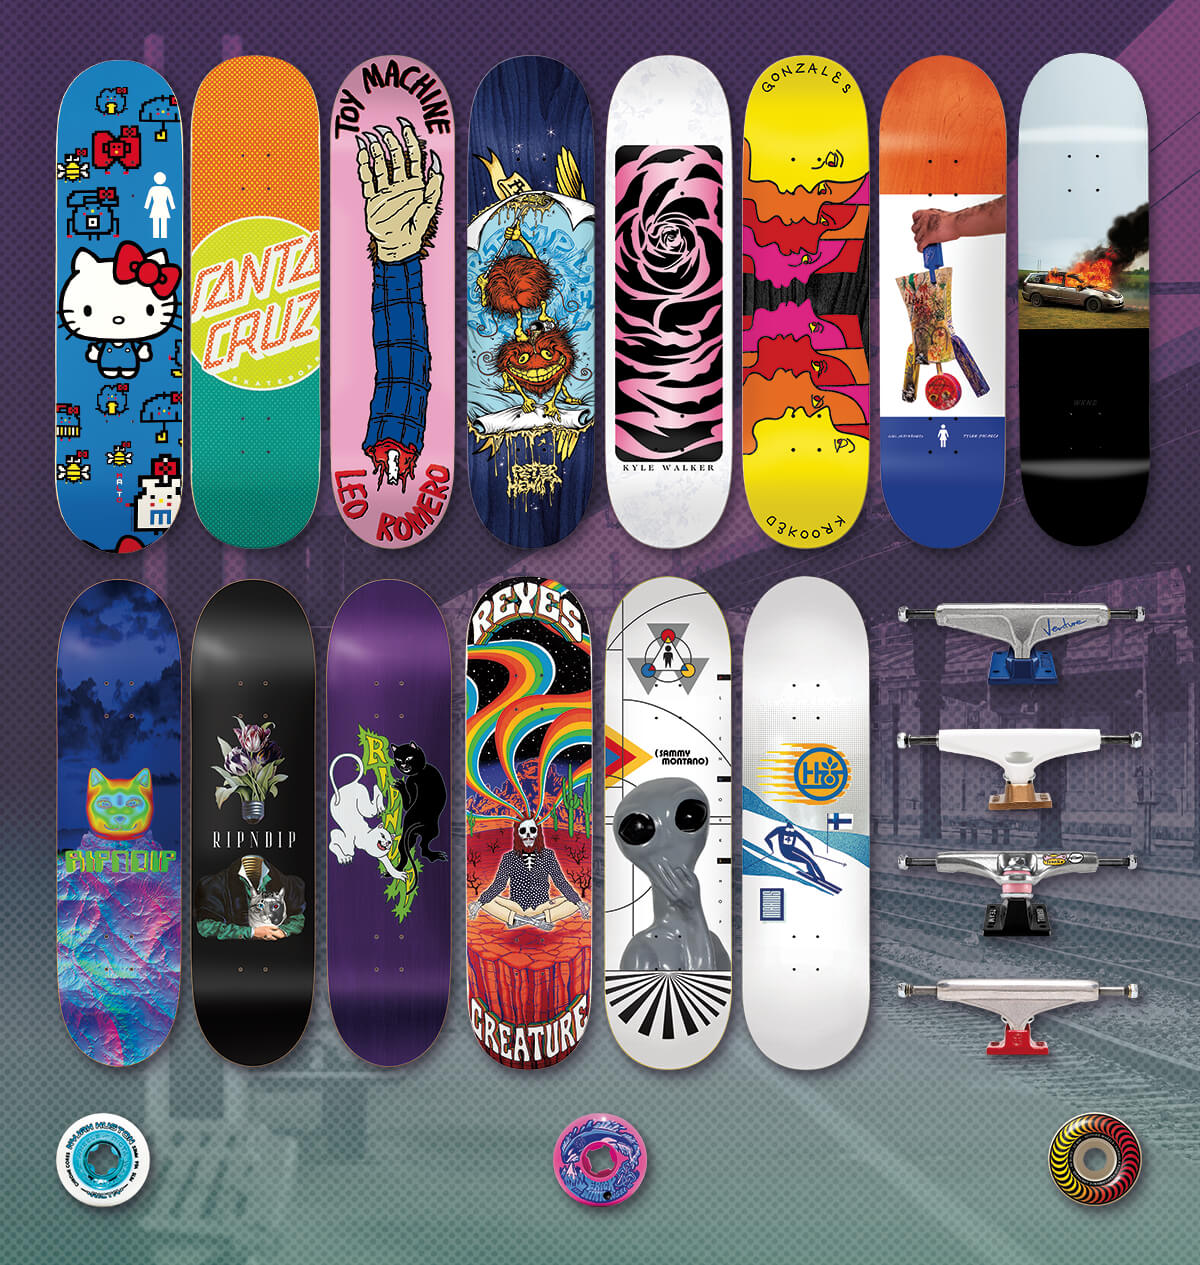 MORE SKATE GIFTS AND IDEAS FOR THE SEASON - SHOP ALL SKATE